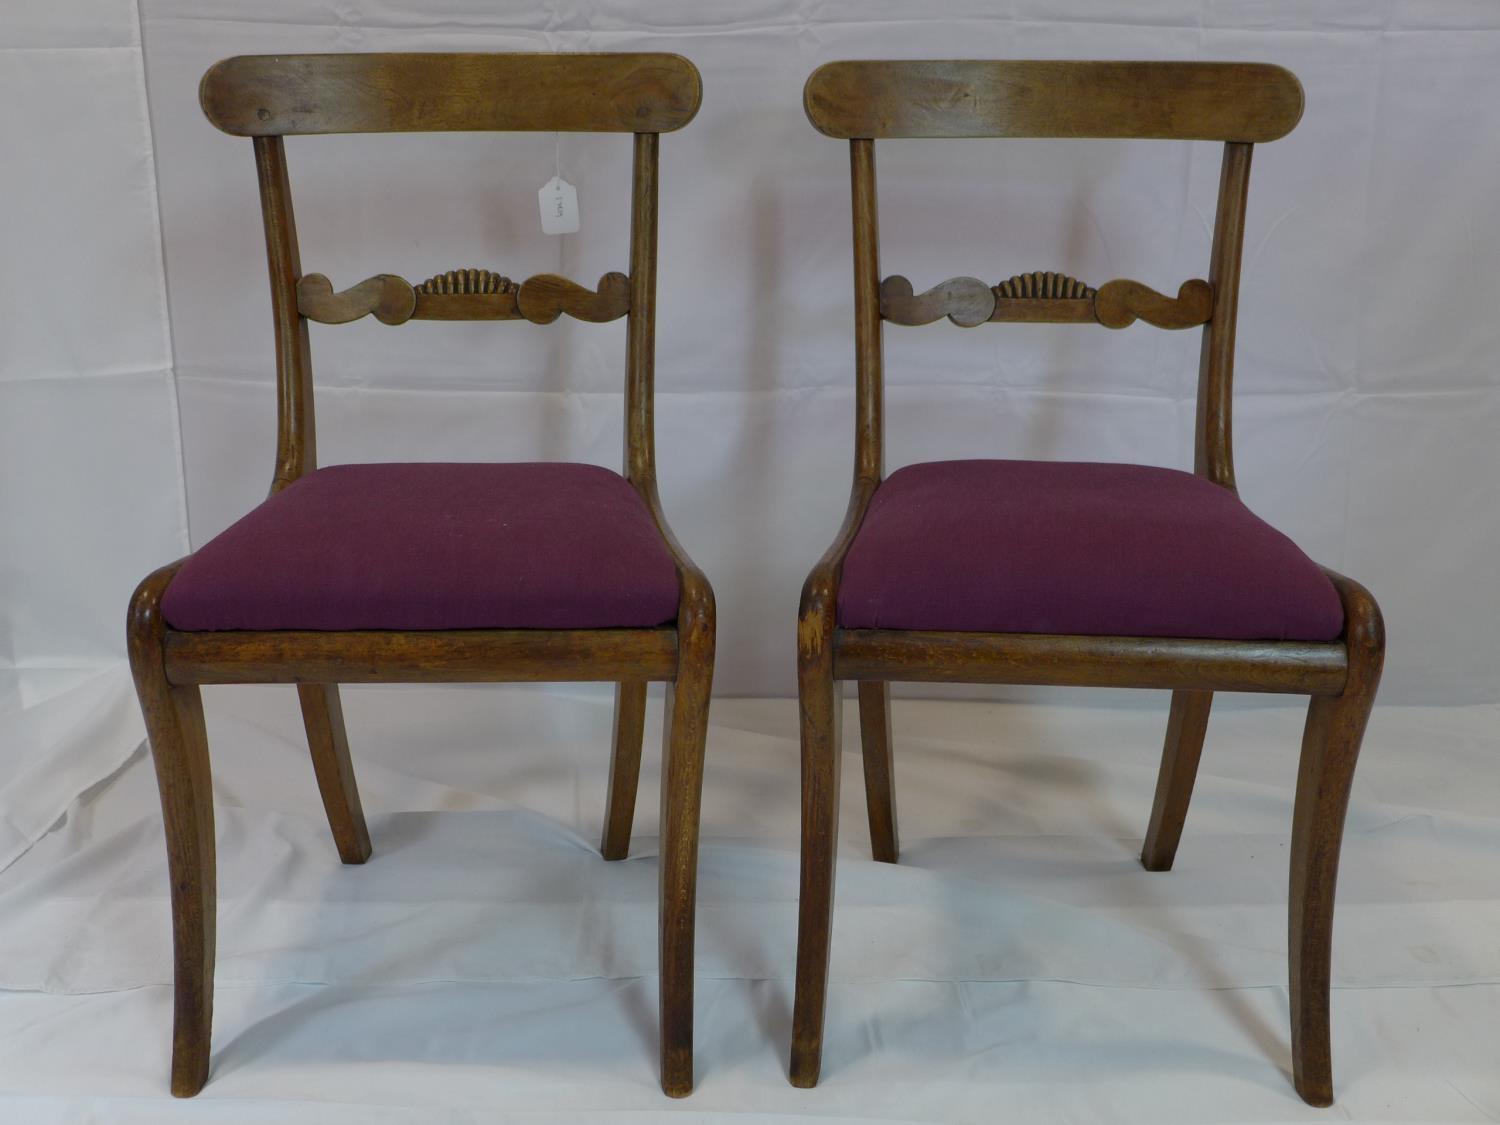 A set of 5 Regency mahogany dining chair - Image 2 of 4